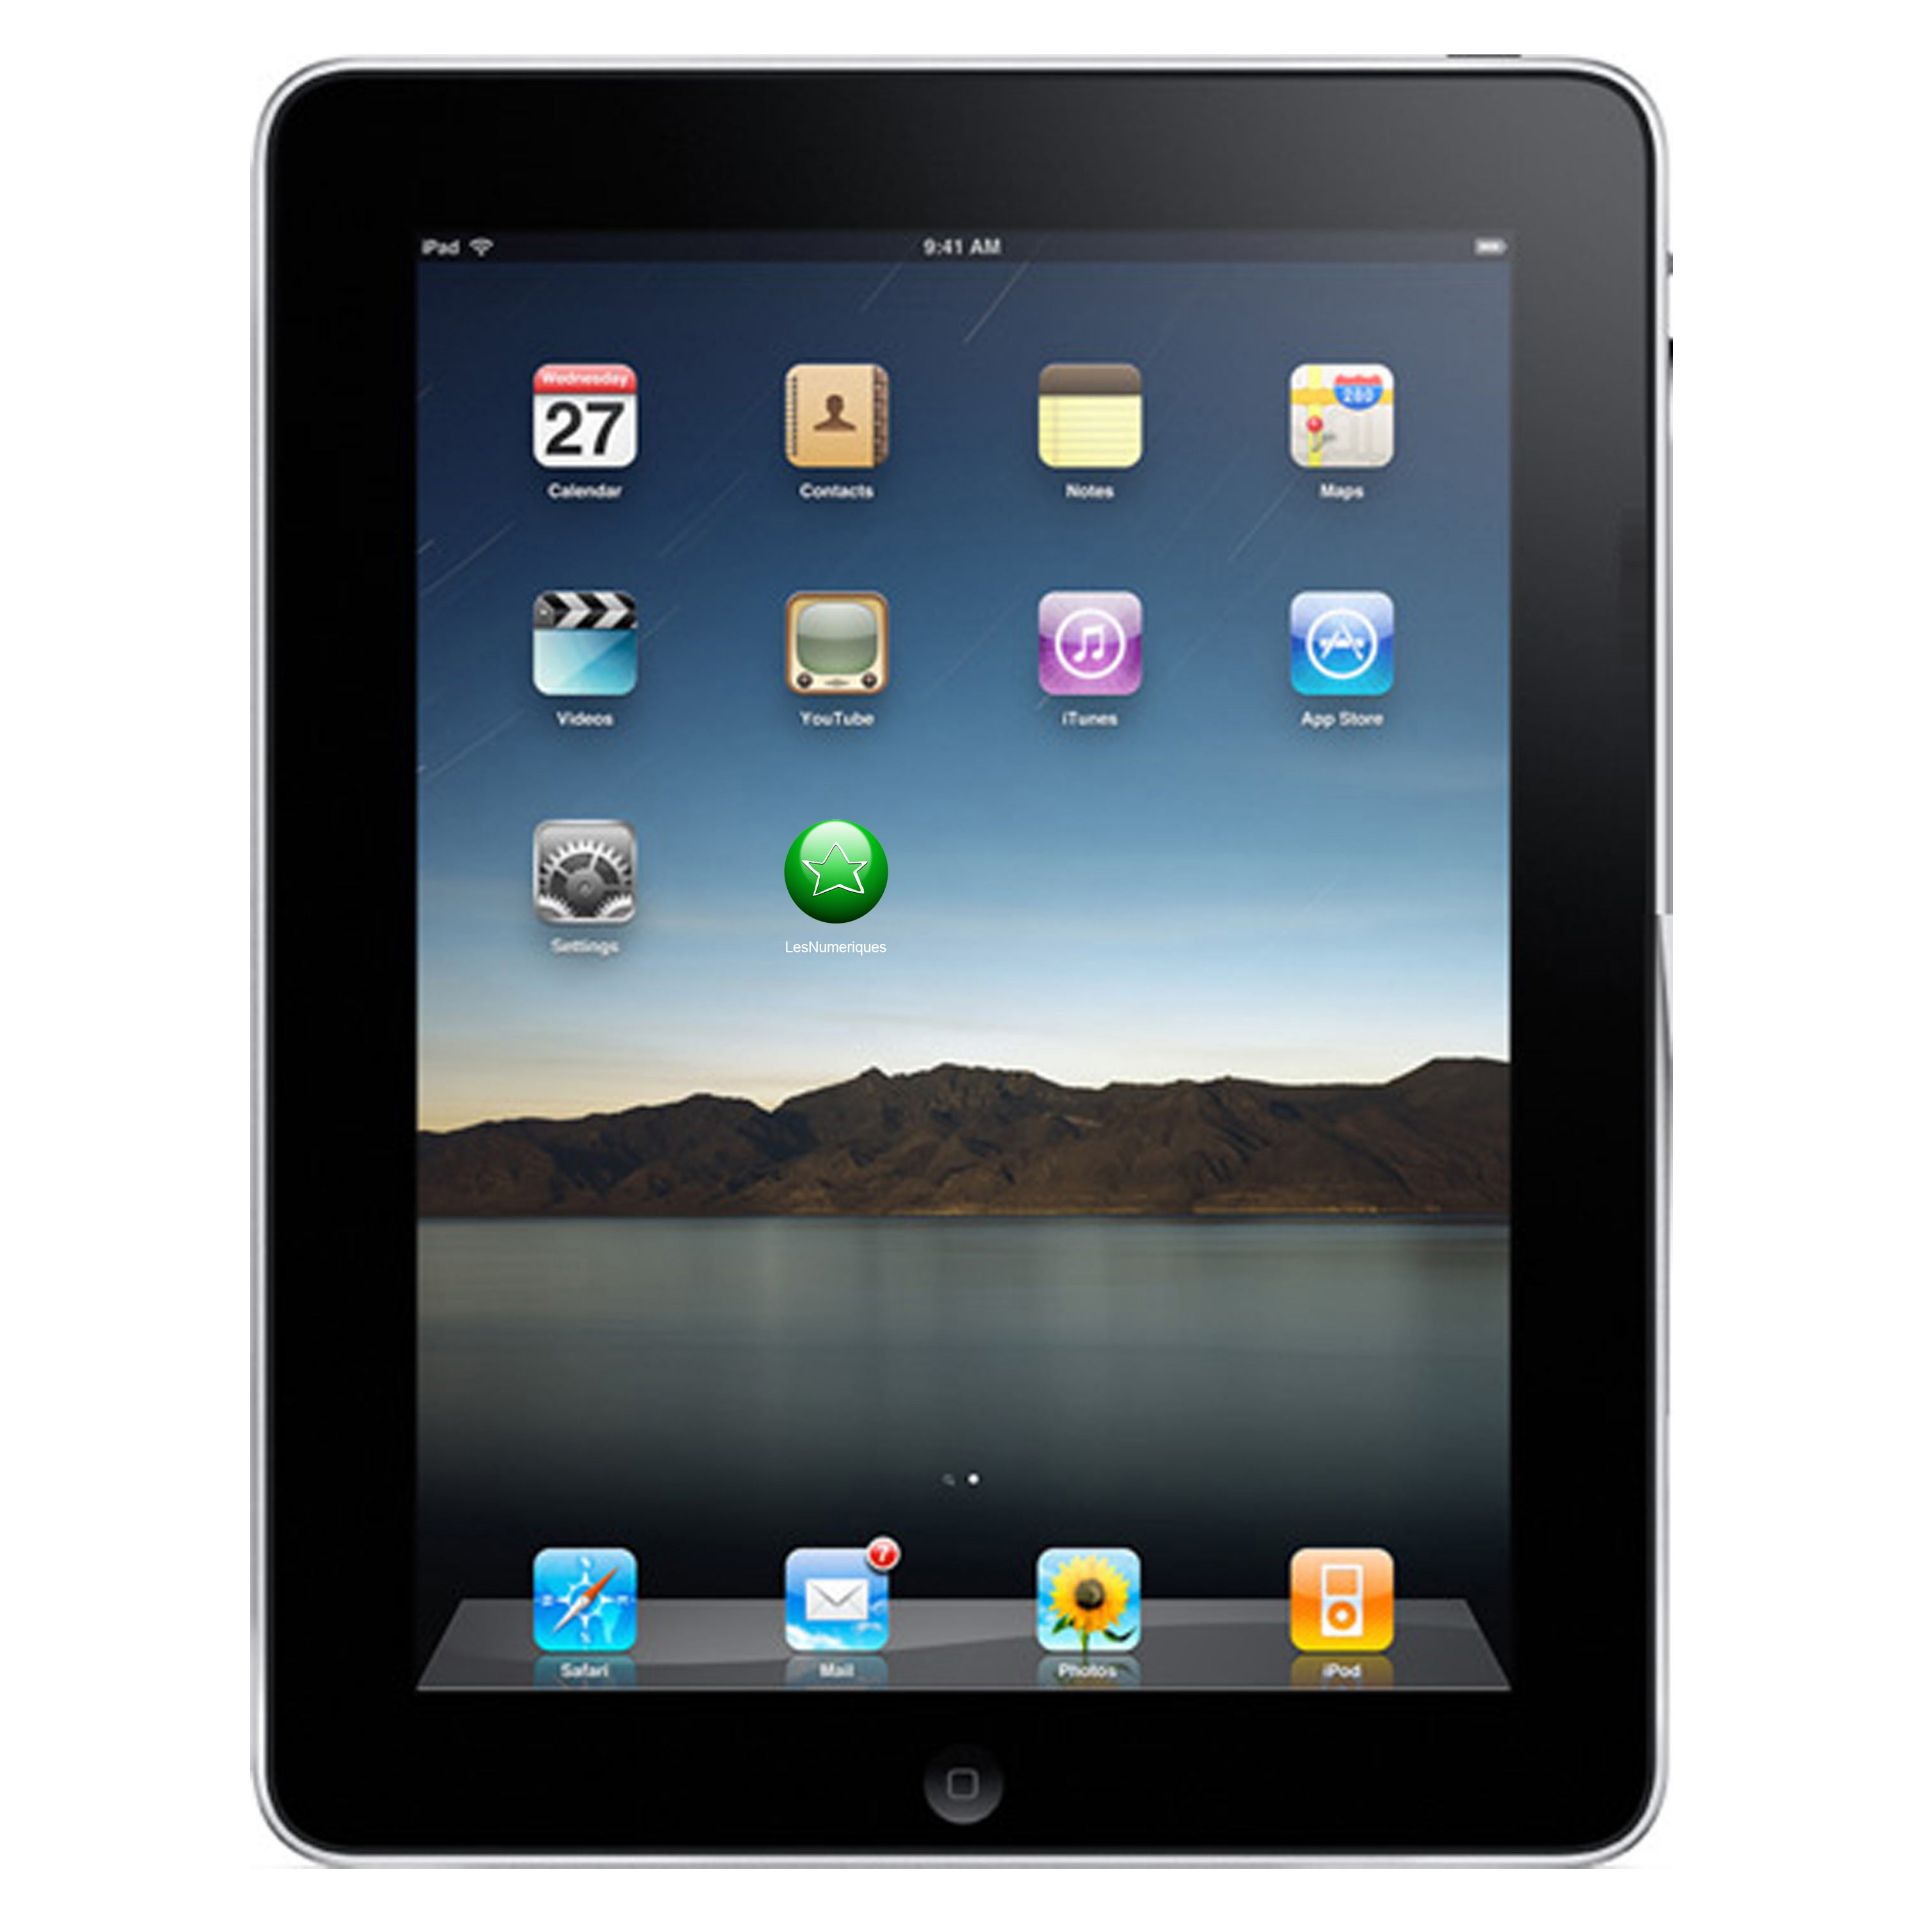 V  Grade B iPad 4 16Gb Black With Two Cameras/Retina Display With Charger In Original Box - - Image 2 of 4